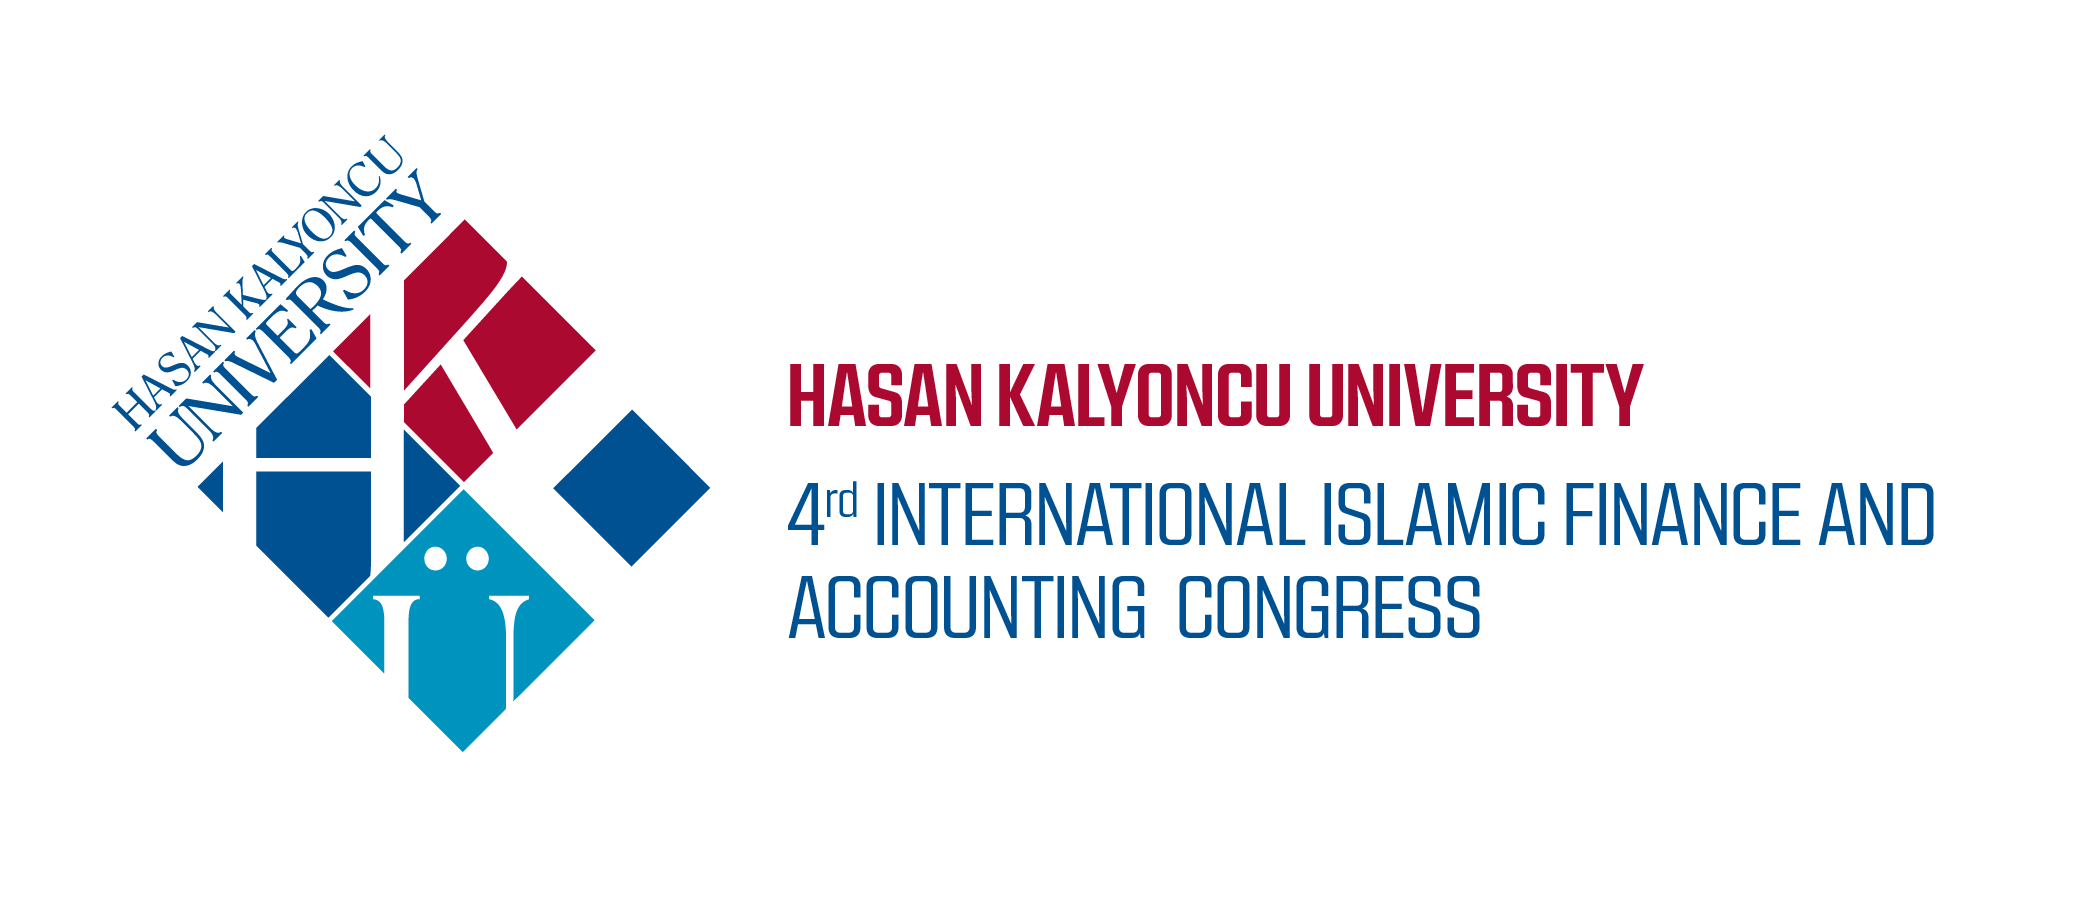 4TH INTERNATIONAL ISLAMIC FINANCE AND ACCOUNTING CONFERENCE - 